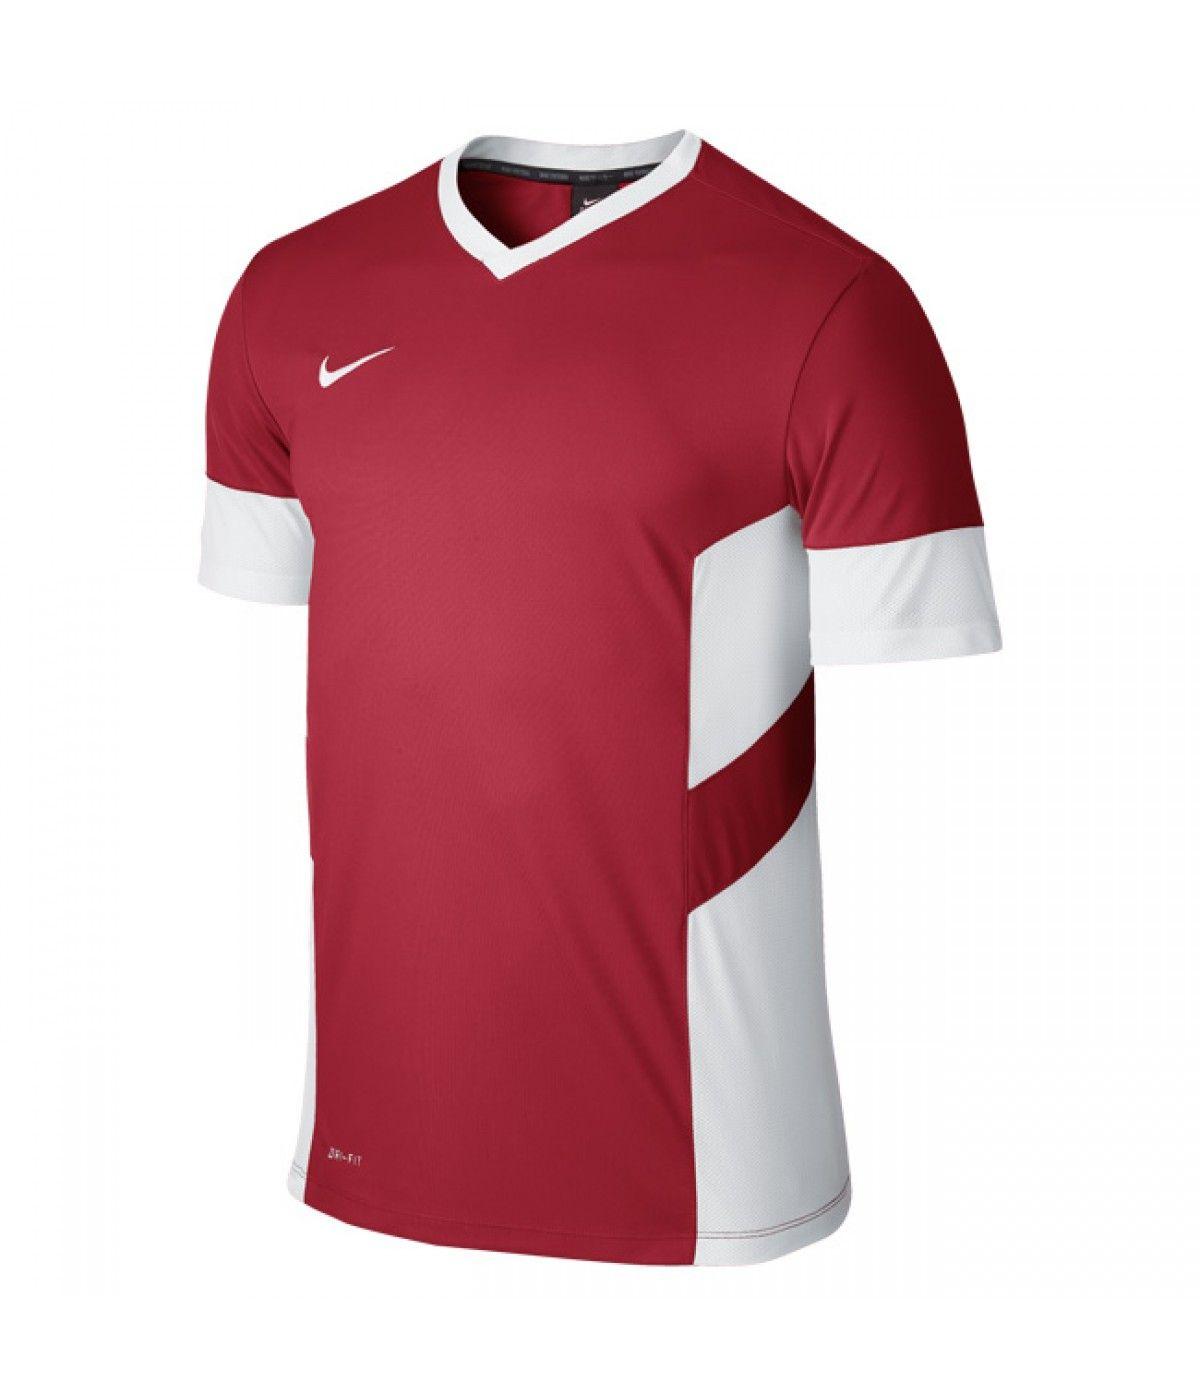 Red and White College Logo - Middlesbrough College Nike Academy 14 Training Top University Red ...